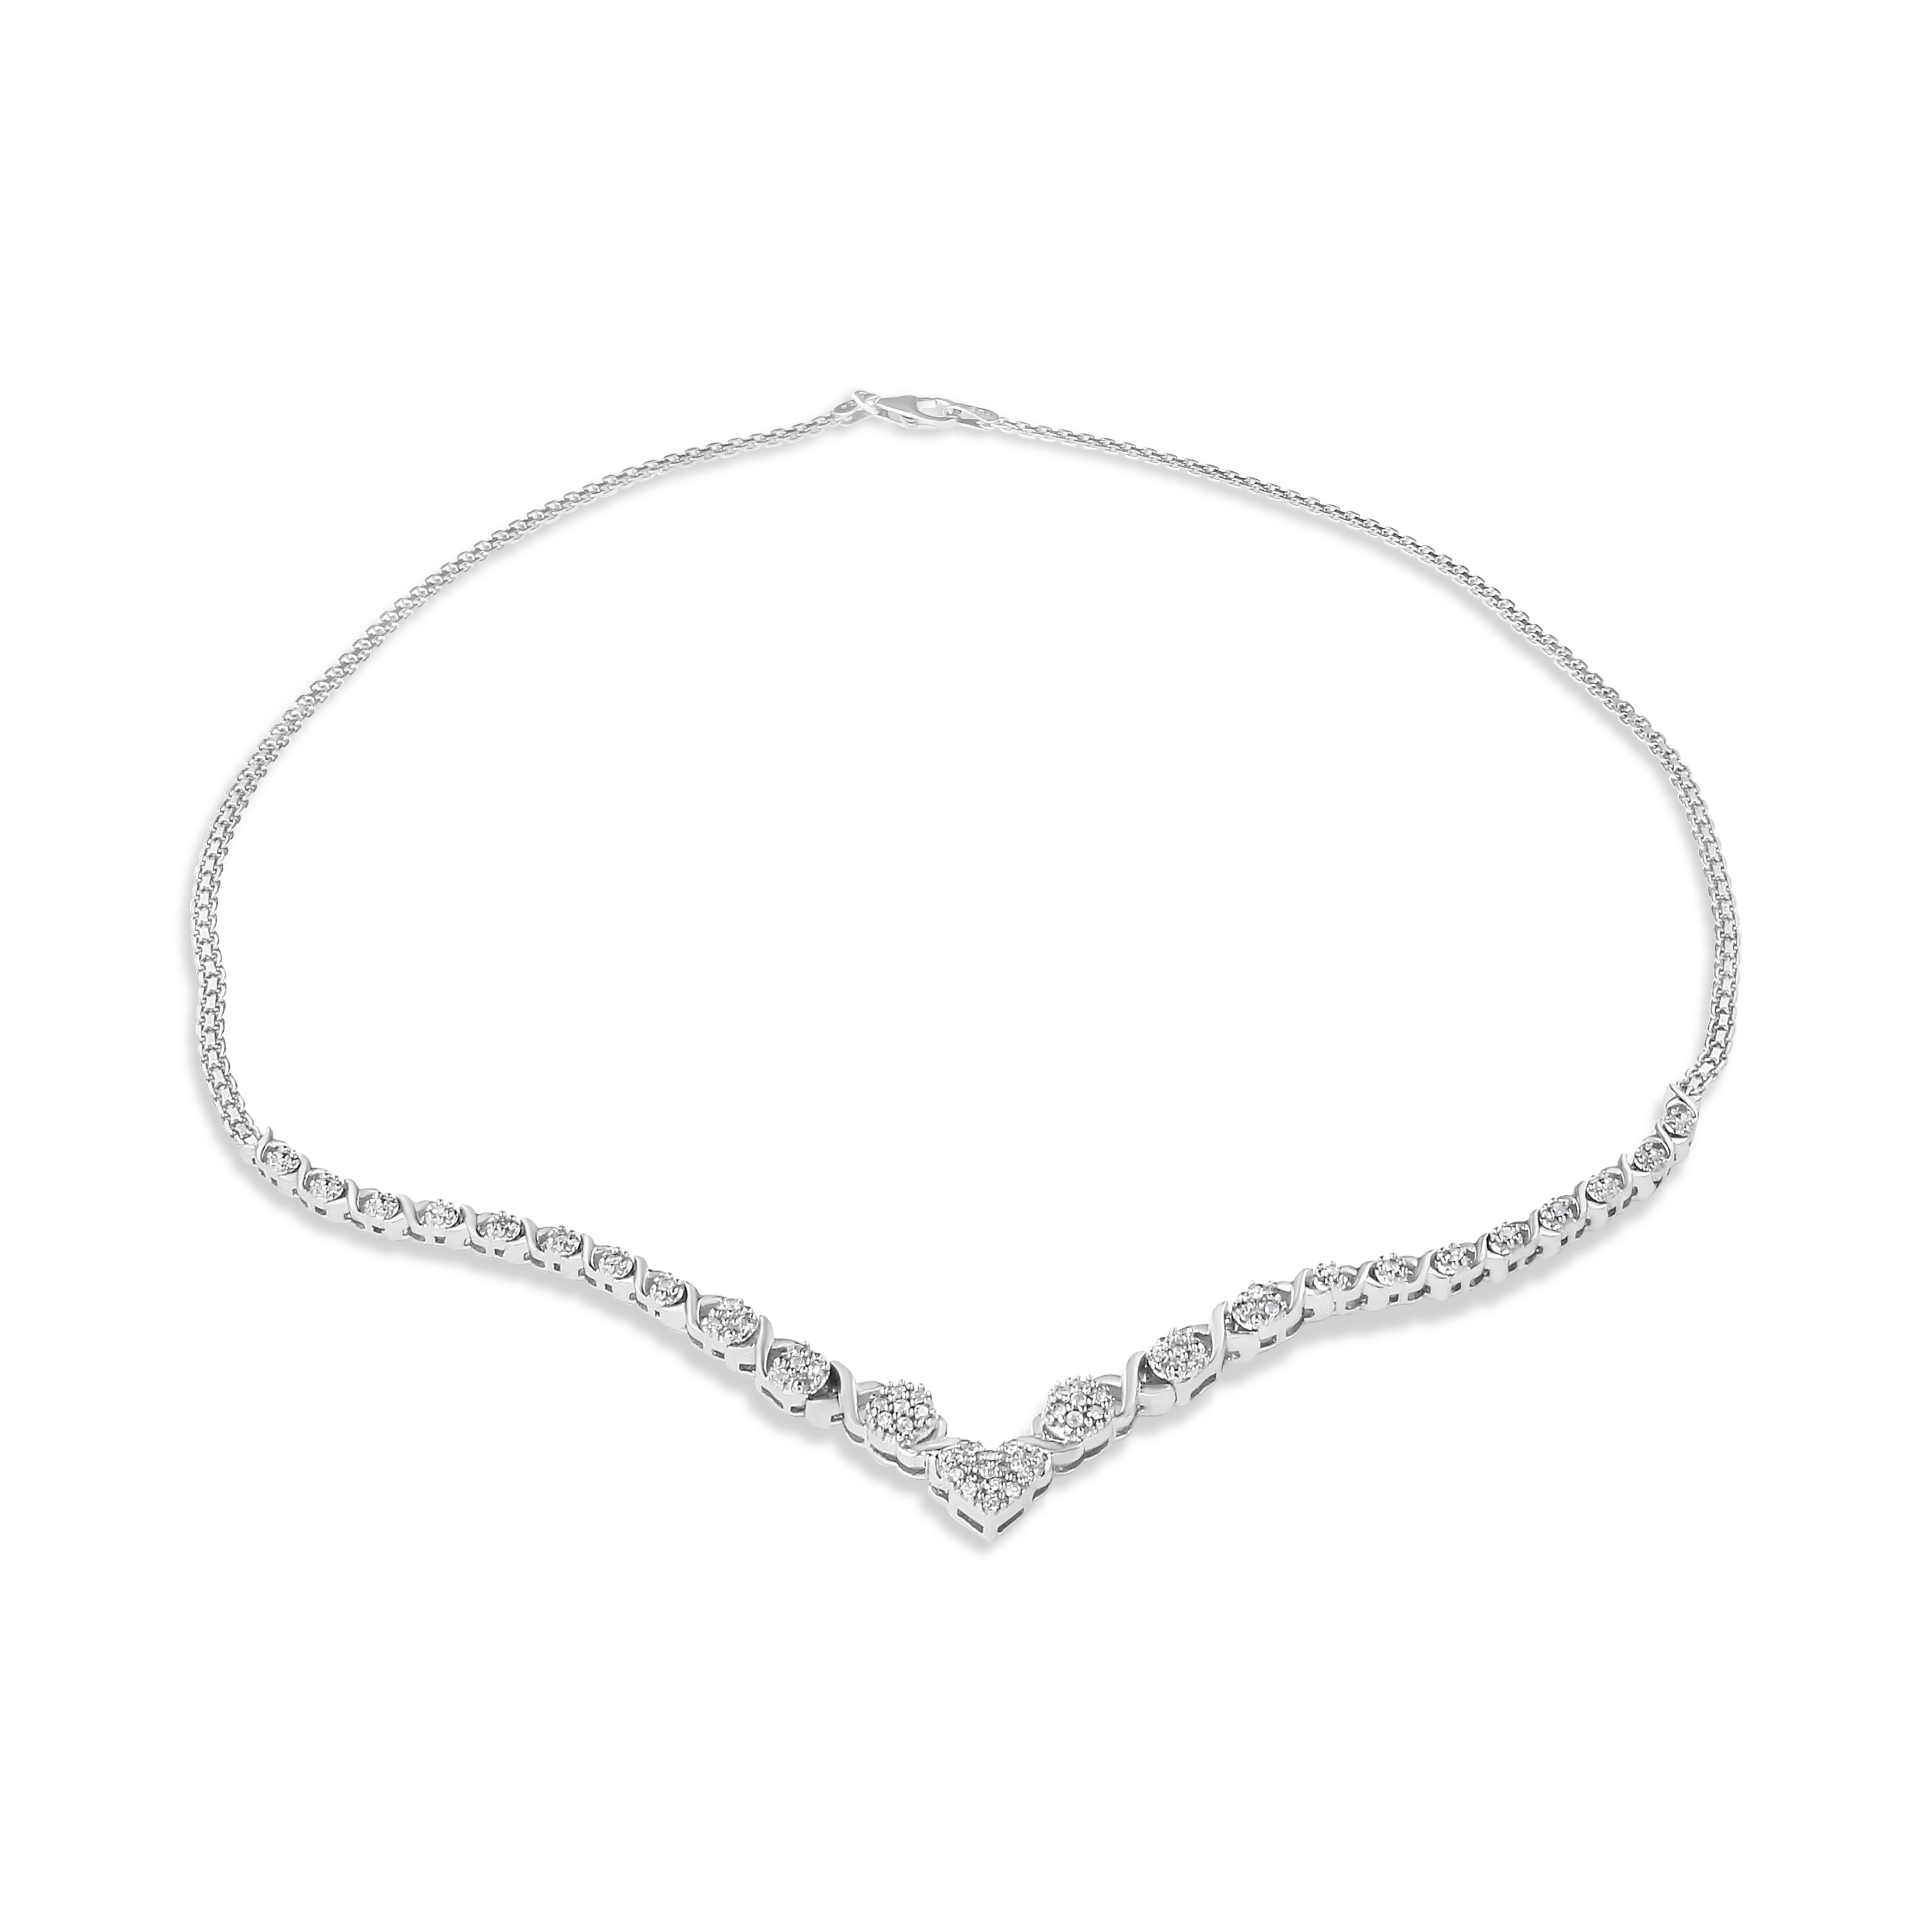 A uniquely elegant diamond cluster necklace. Each diamond is set to create a captivating V-shaped base with an attached 18 inch box chain. There are 52 rose-cut diamonds set in the finest .925 sterling silver metal.
The diamonds are promo quality,